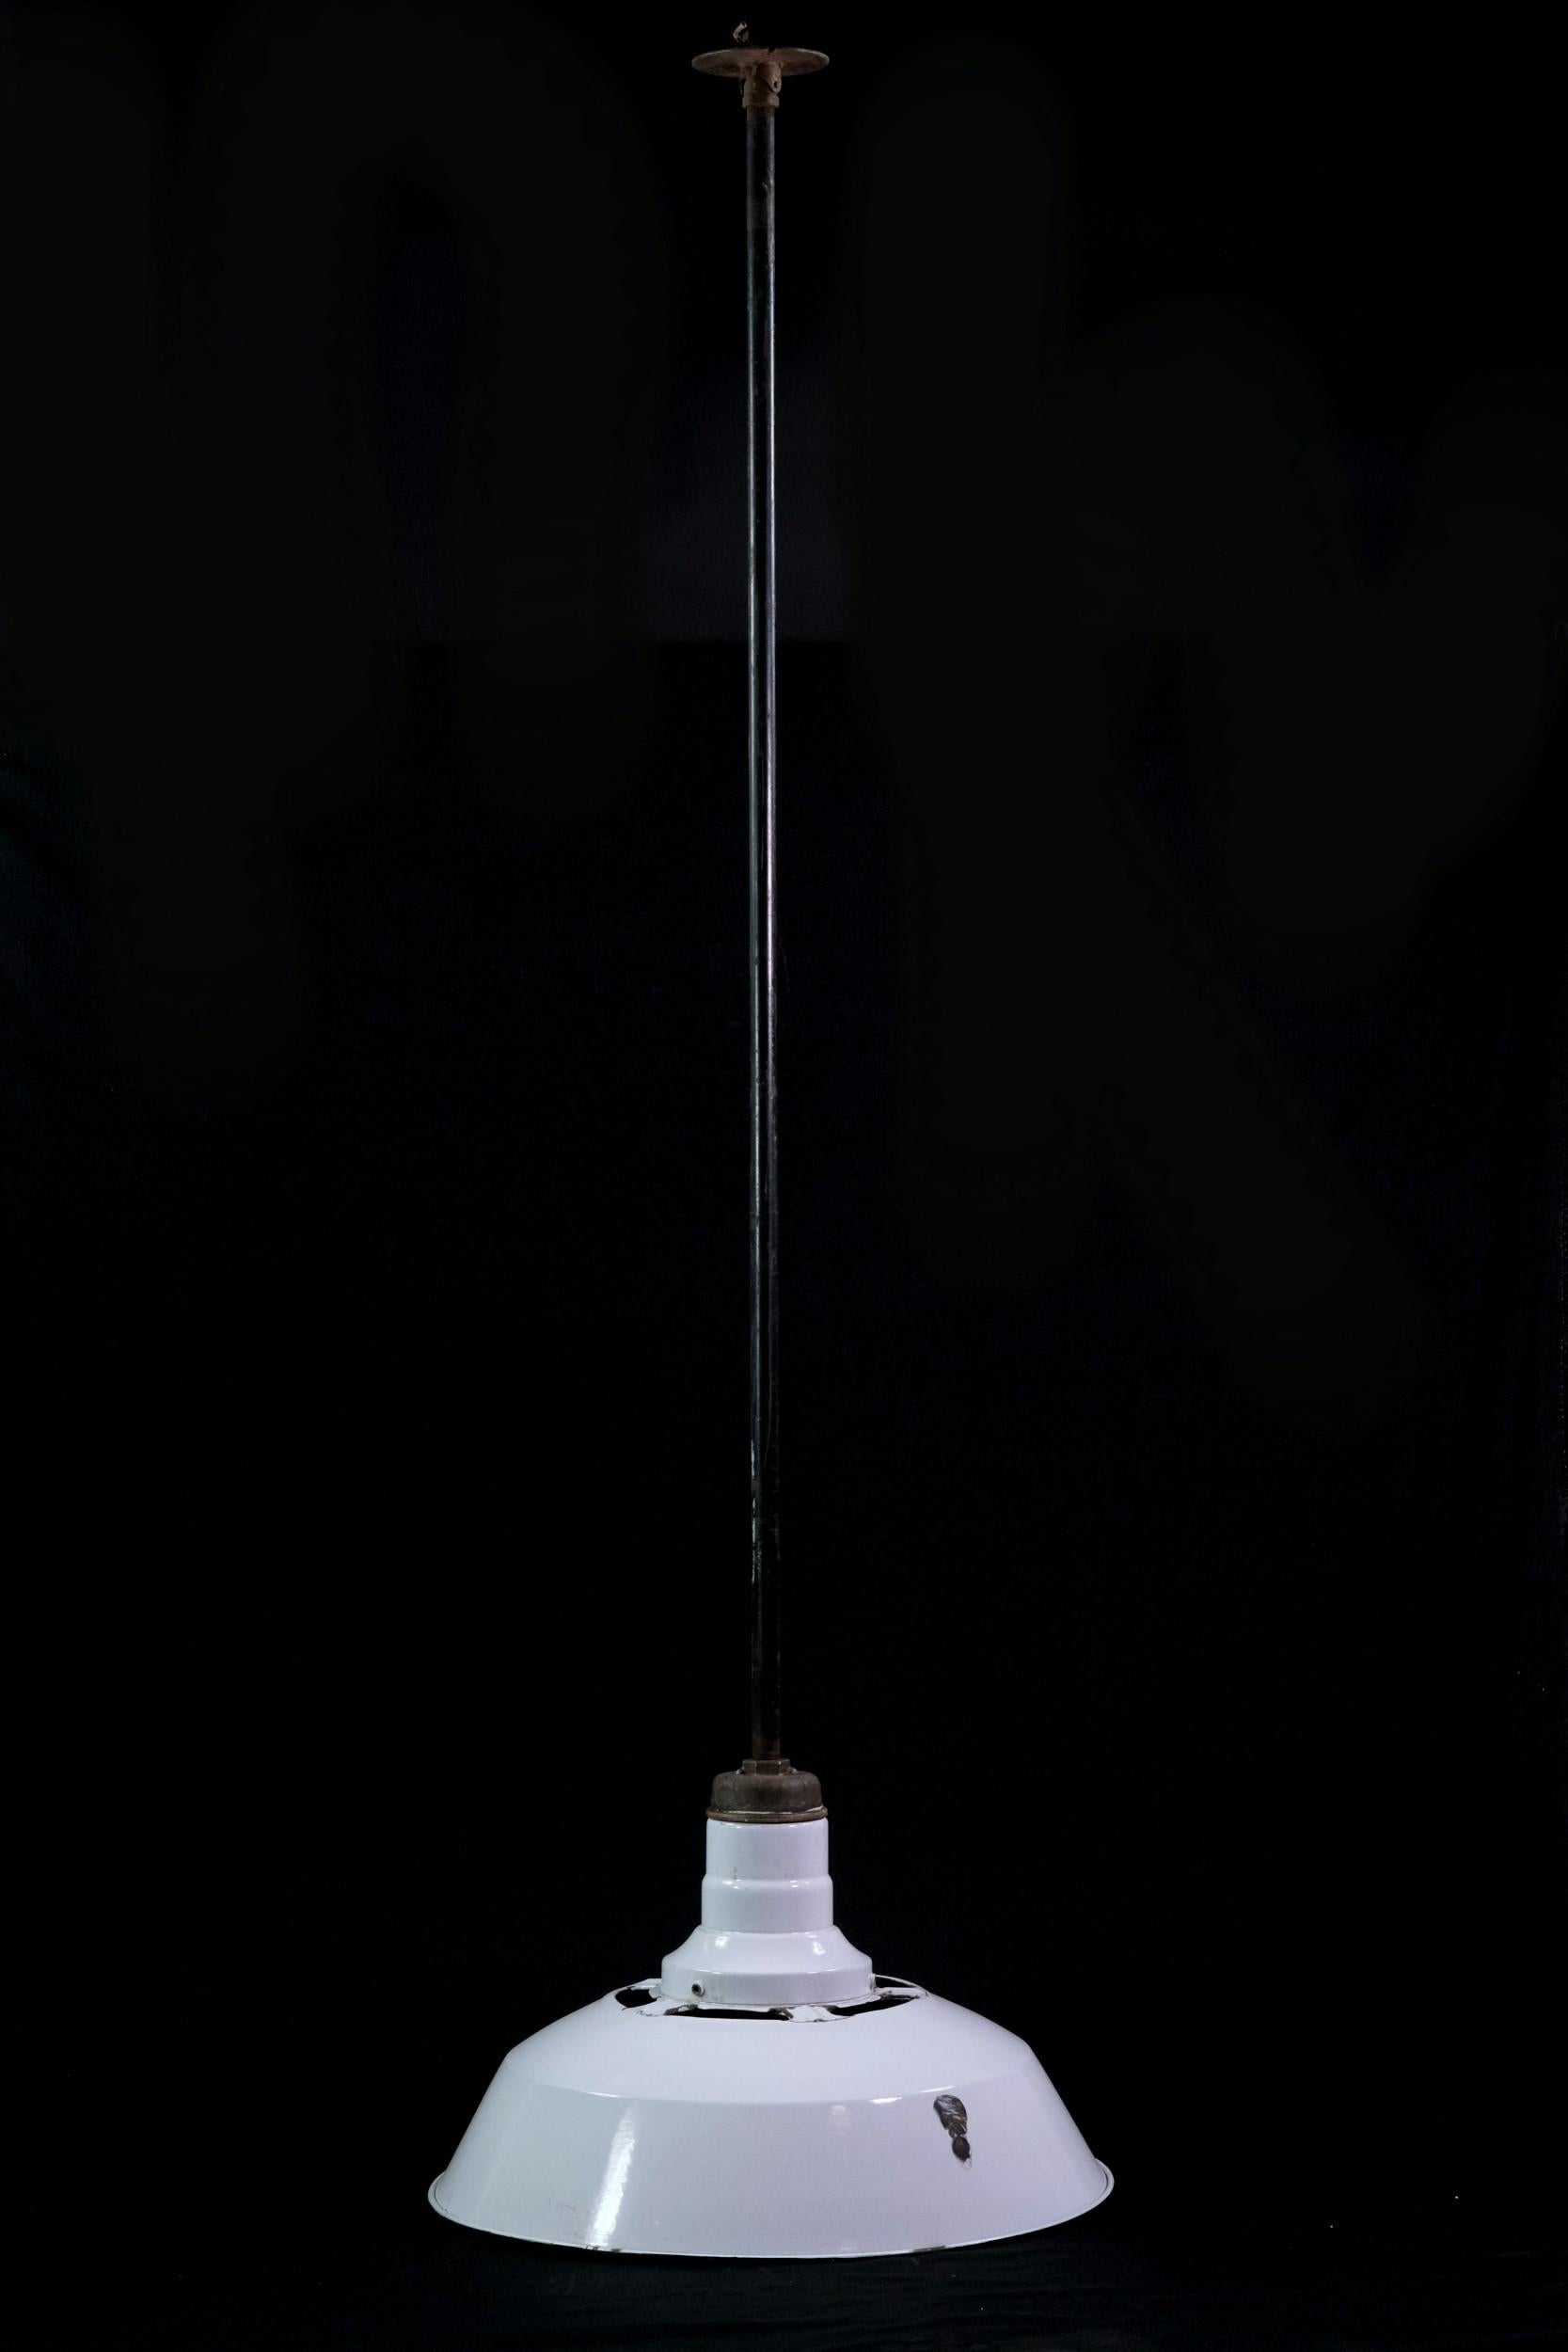 White enamel shade with black bottom trim mounted to a steel conduit pole. Some chipping and rust which varies by light. Small quantity available at time of posting. Cleaned and rewired. Priced each. Please inquire. Please note, this item is located